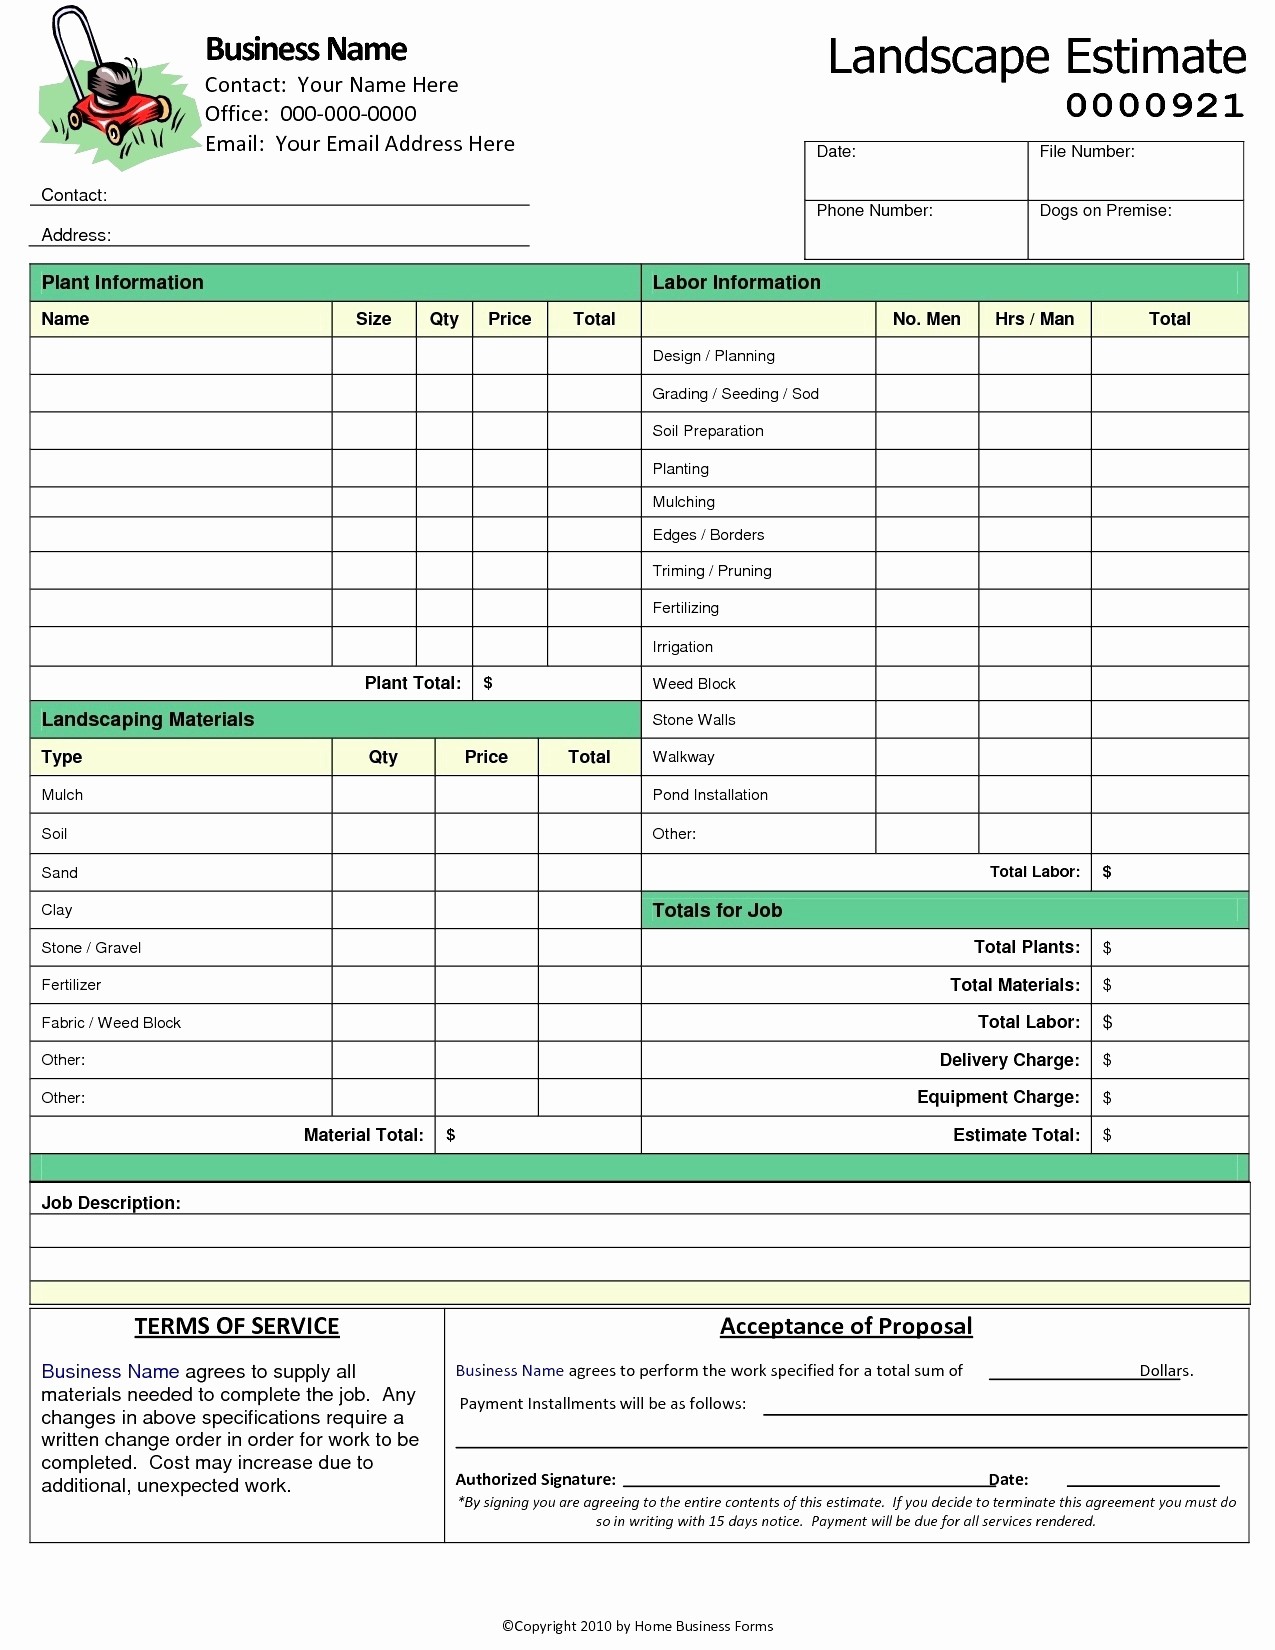 Quickbooks Proposal Templates New Gallery Fresh Document